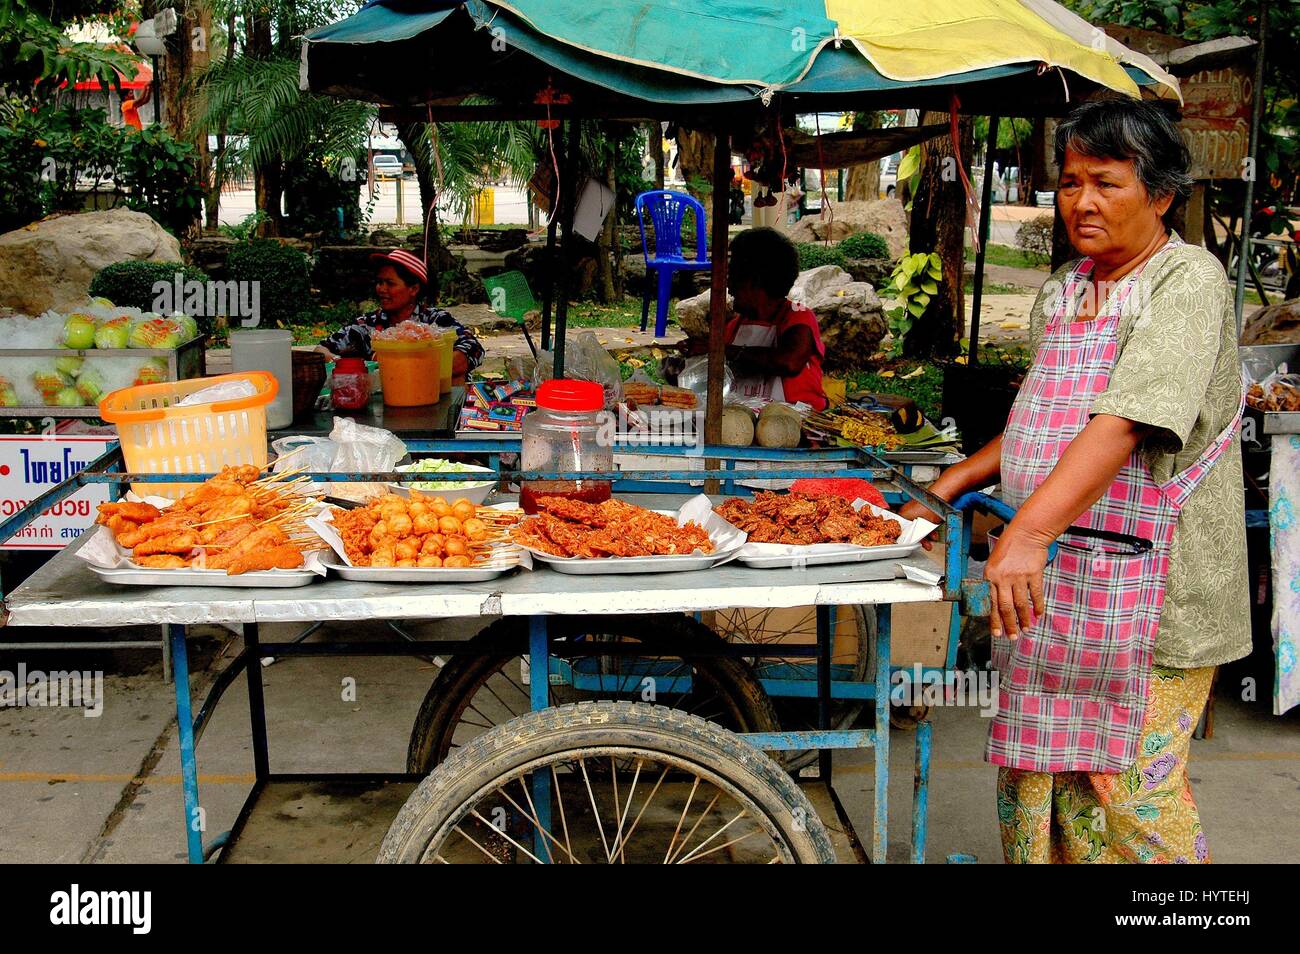 Nakhon Pathom, Thailand - December 27, 2005:  Woman street vendor pushing her cart filled with fried food at Wat Dai Lom Stock Photo